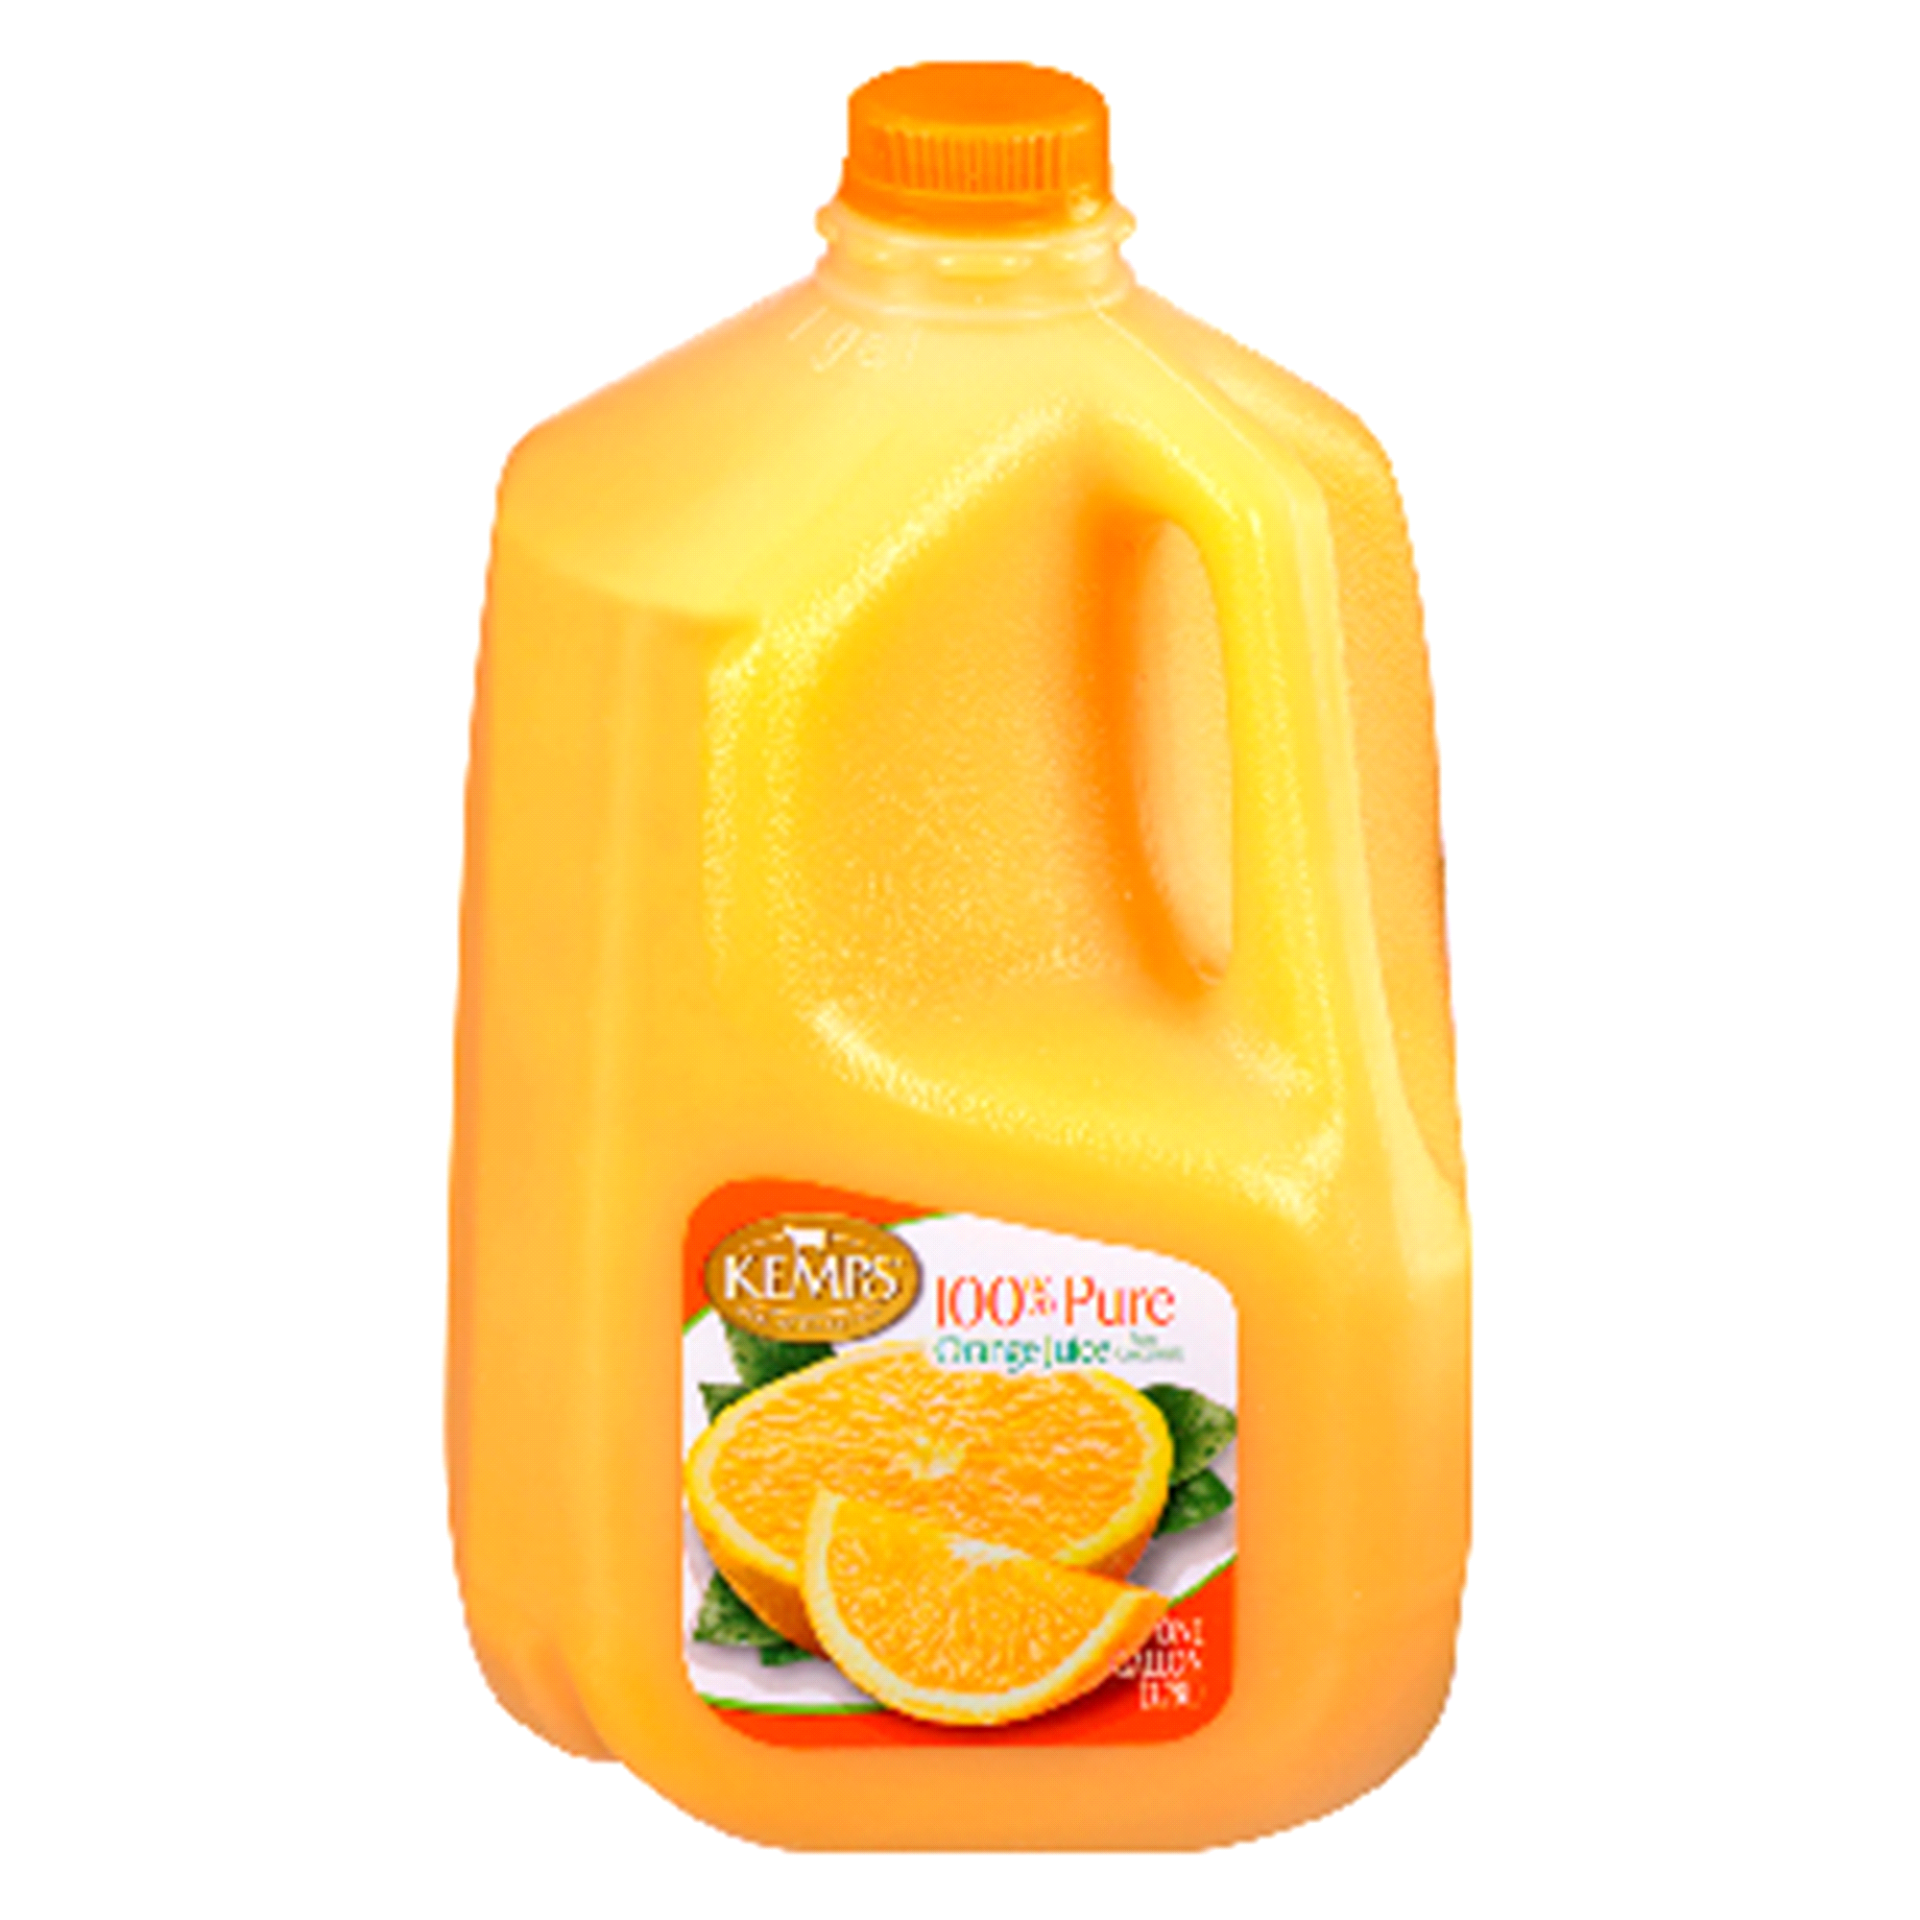 slide 1 of 8, Kemps 100% Pure From Concentrate Orange Juice, 1 gal